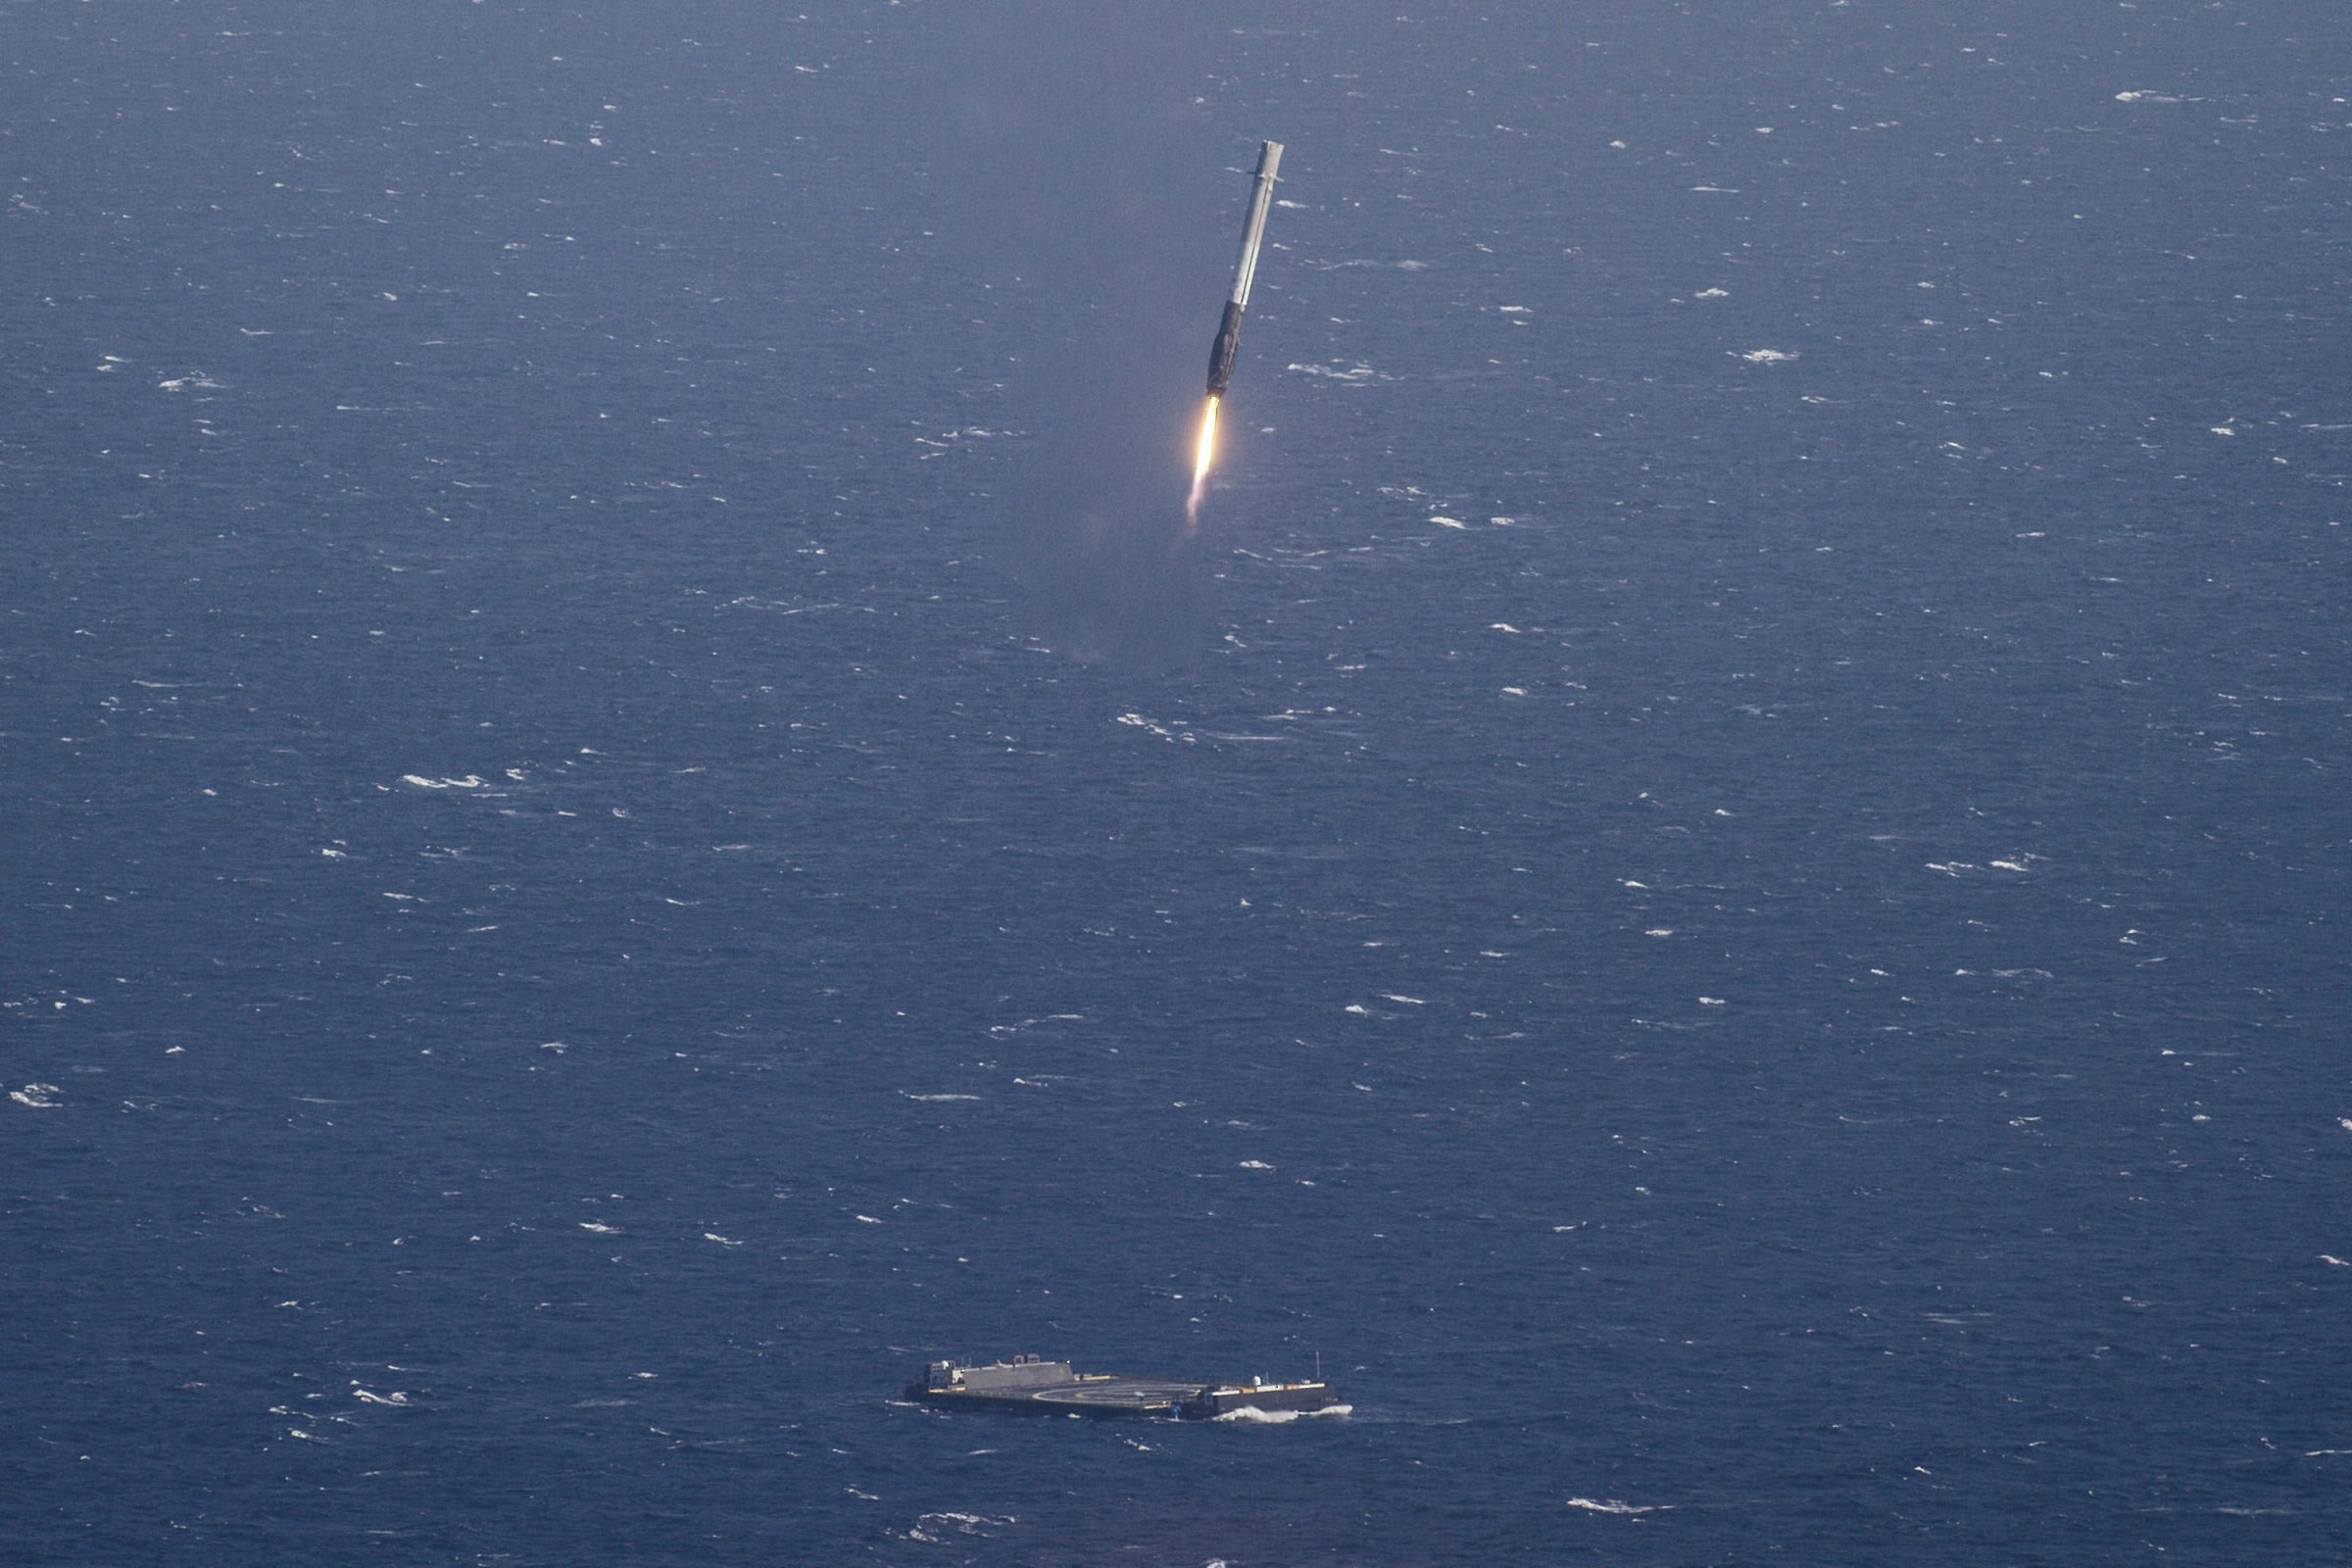 SpaceX Falcon 9 rocket successful landing on a floating platform in the Atlantic Ocean